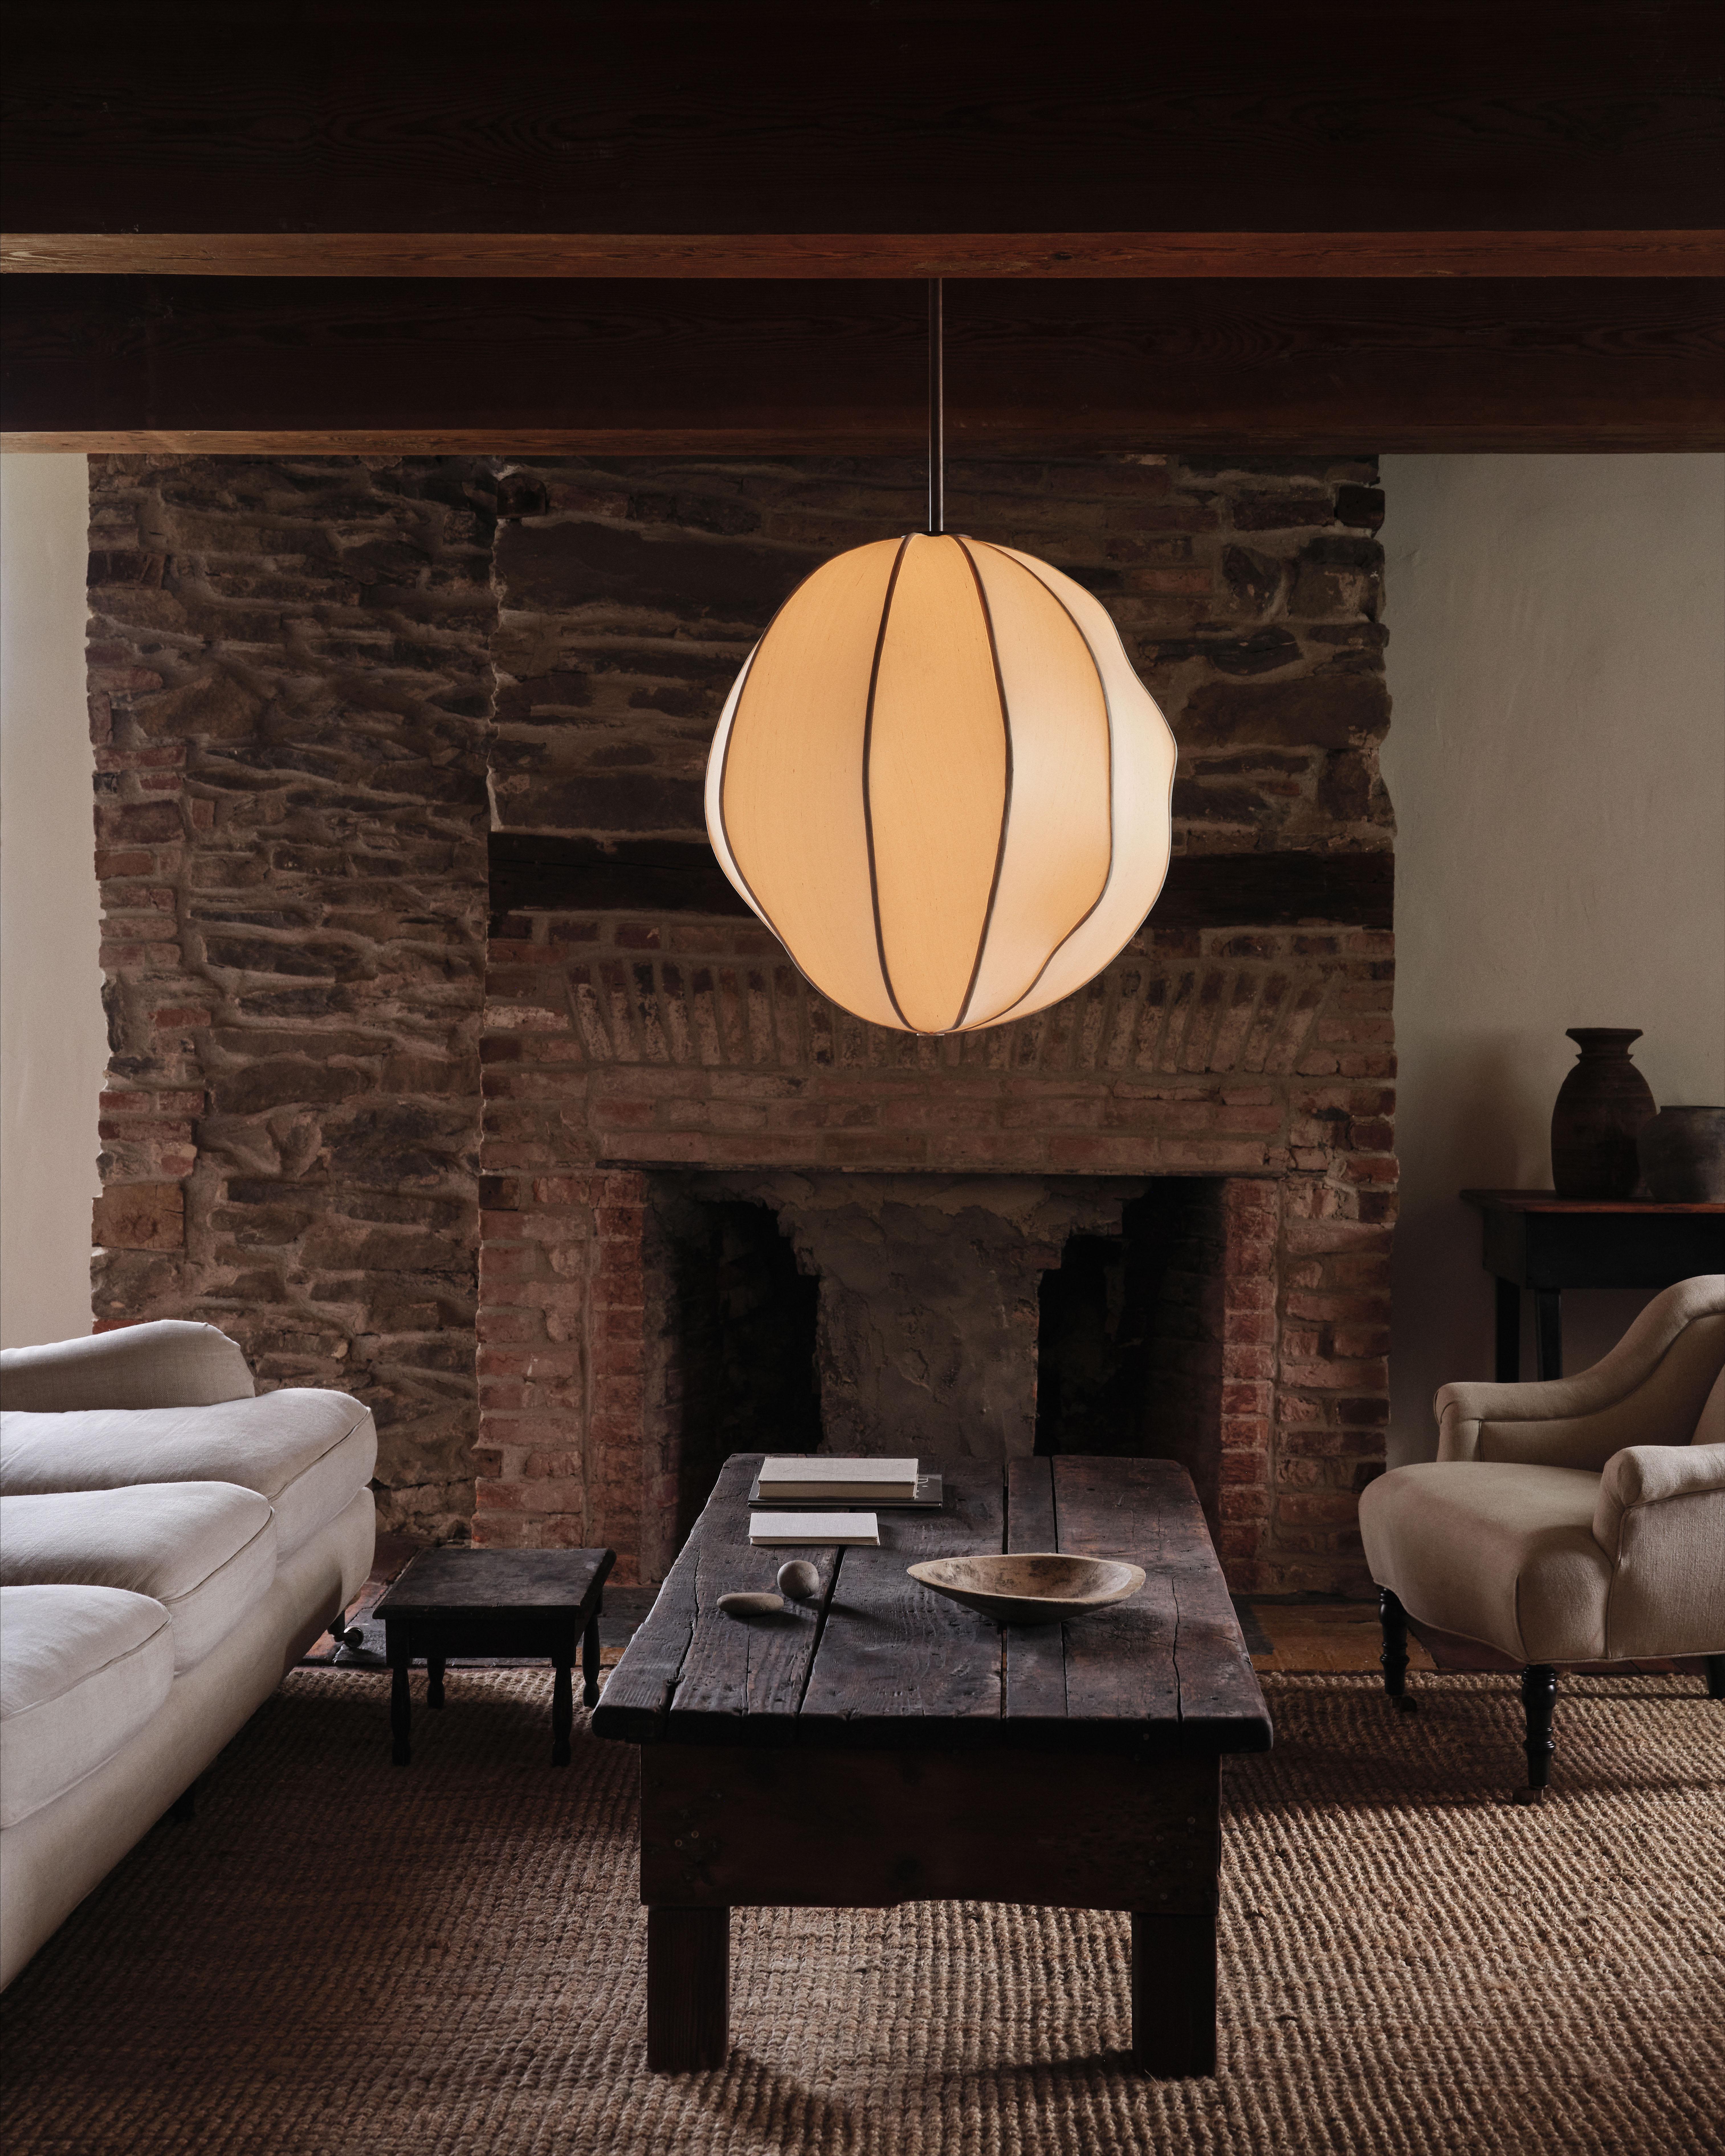 A perforated hardwood post stretches from floor to ceiling, allowing the lamp armature to be moved up or down to the desired height. A hand-upholstered silk globe is suspended from the end of the armature, providing a warm glow.

Materials: White